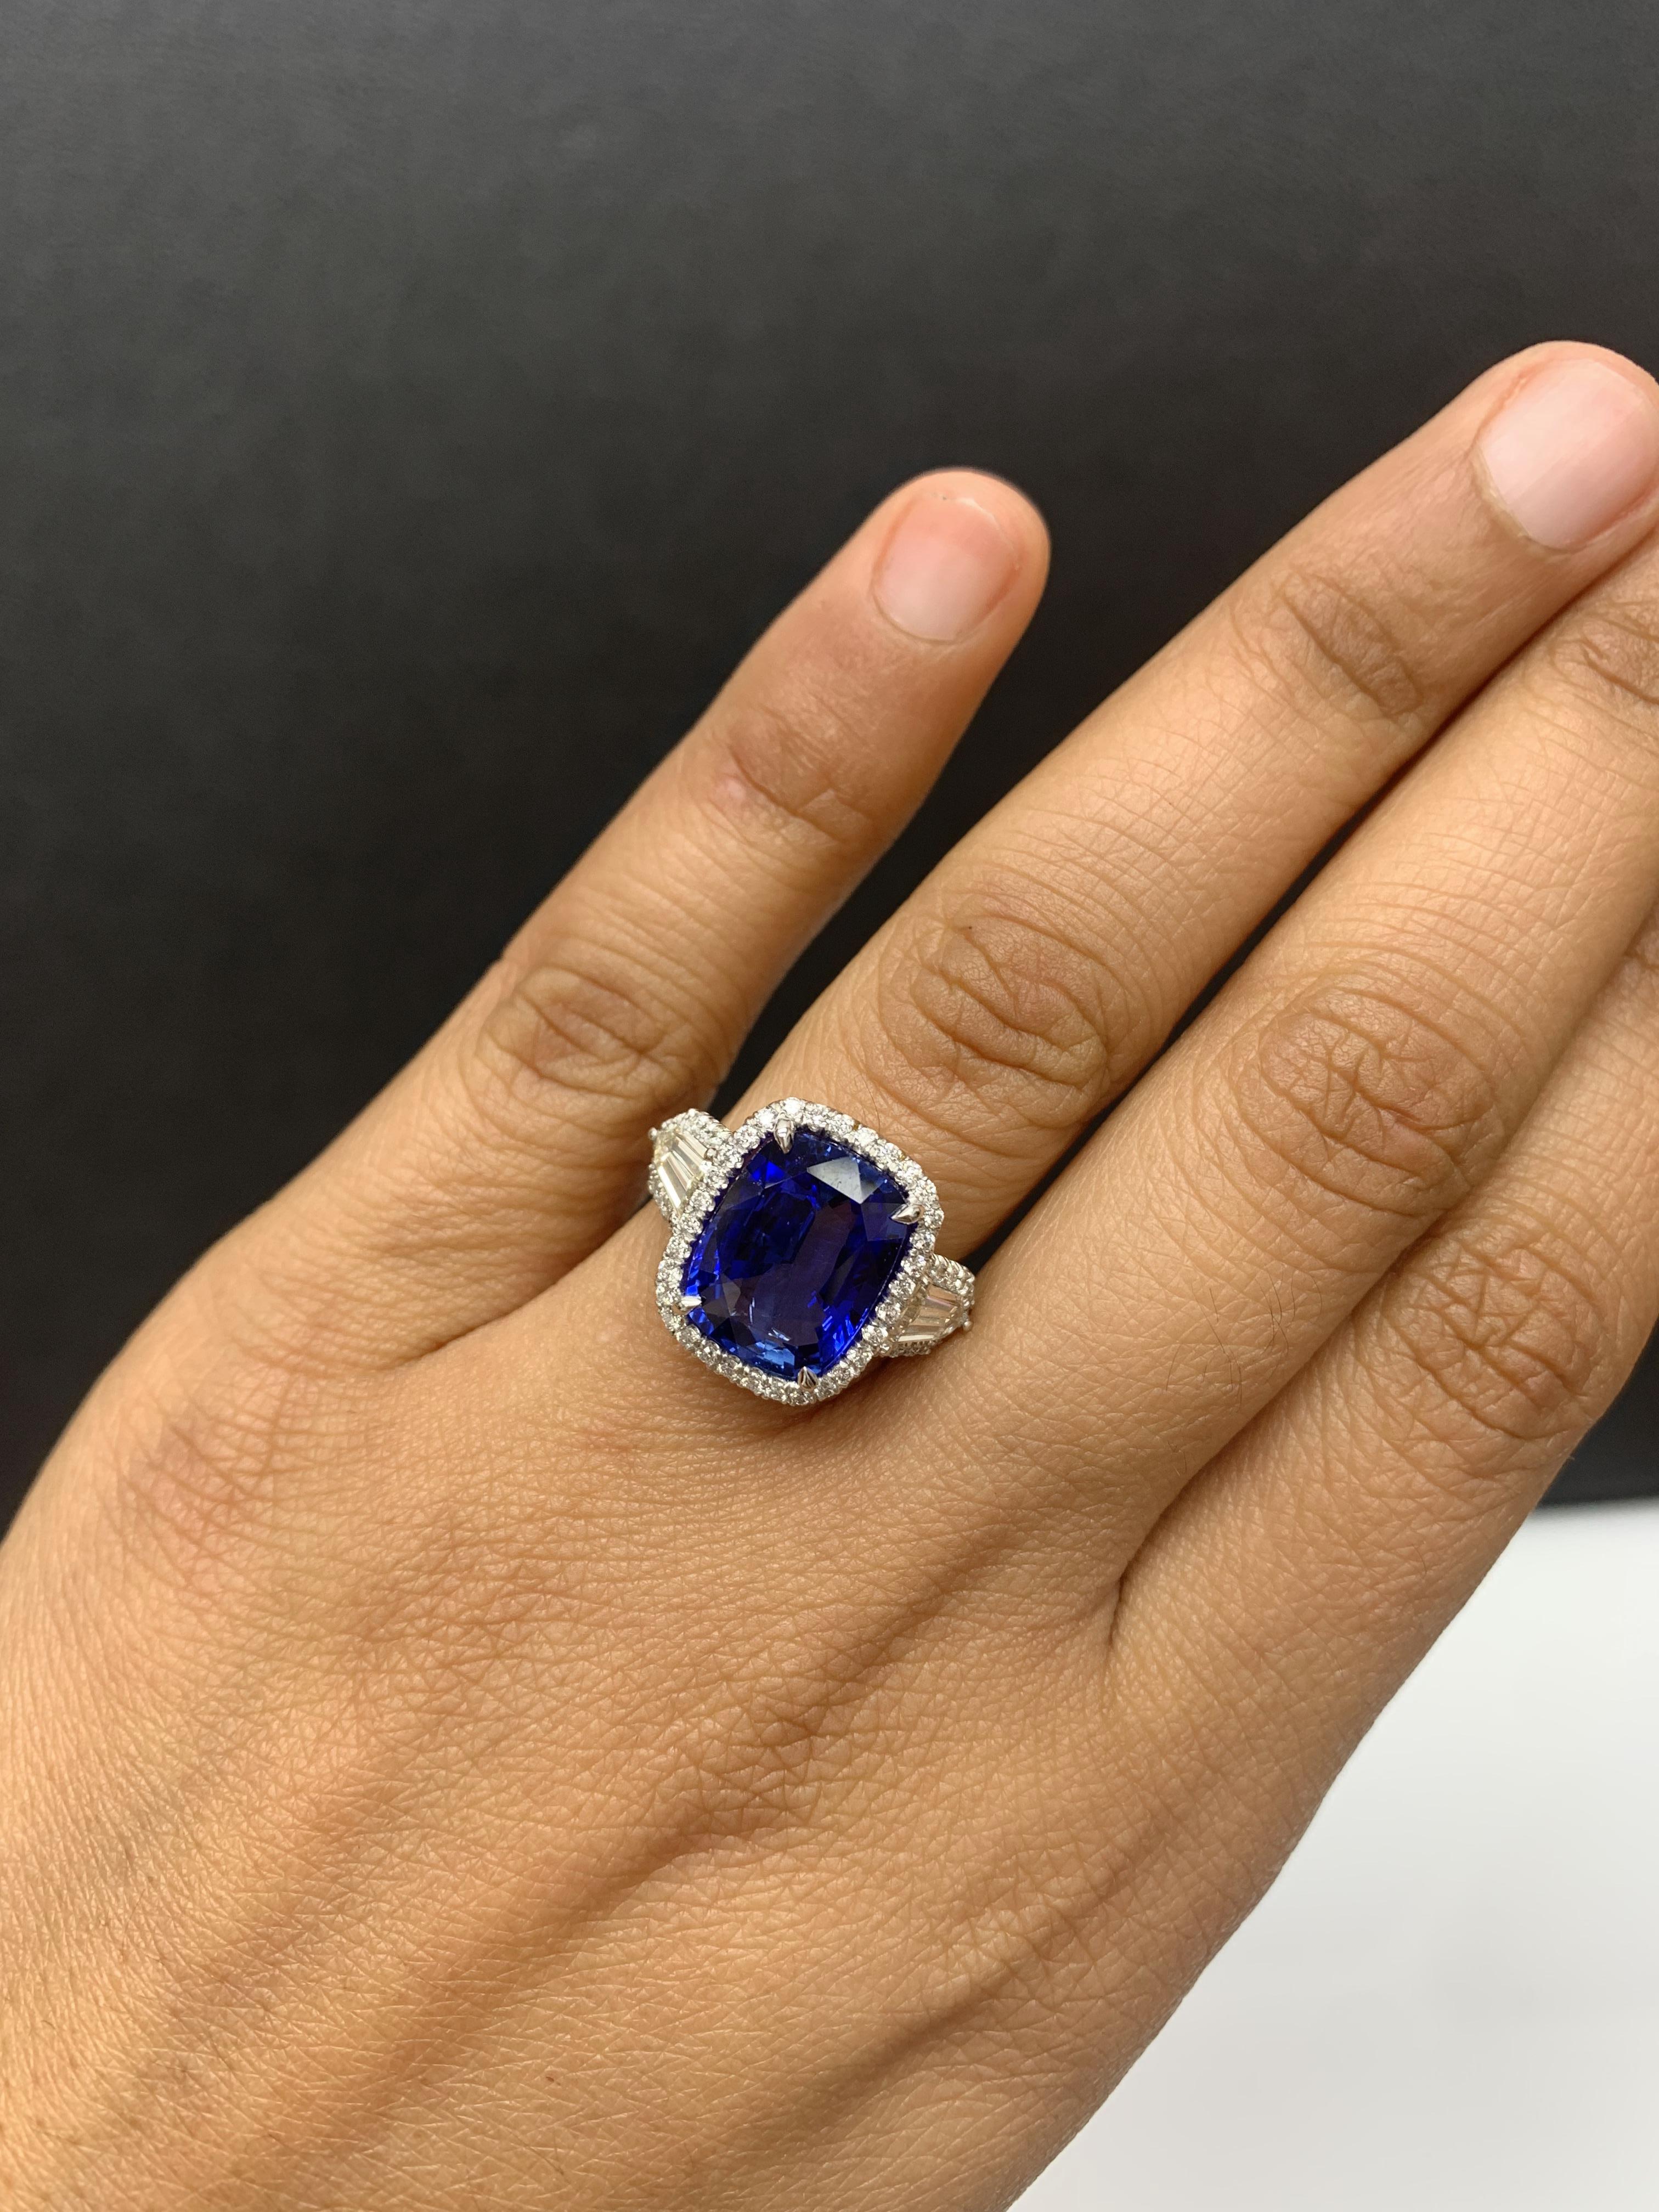 7.51 Carat Cushion Cut Sapphire and Diamond Engagement Ring in Platinum For Sale 6